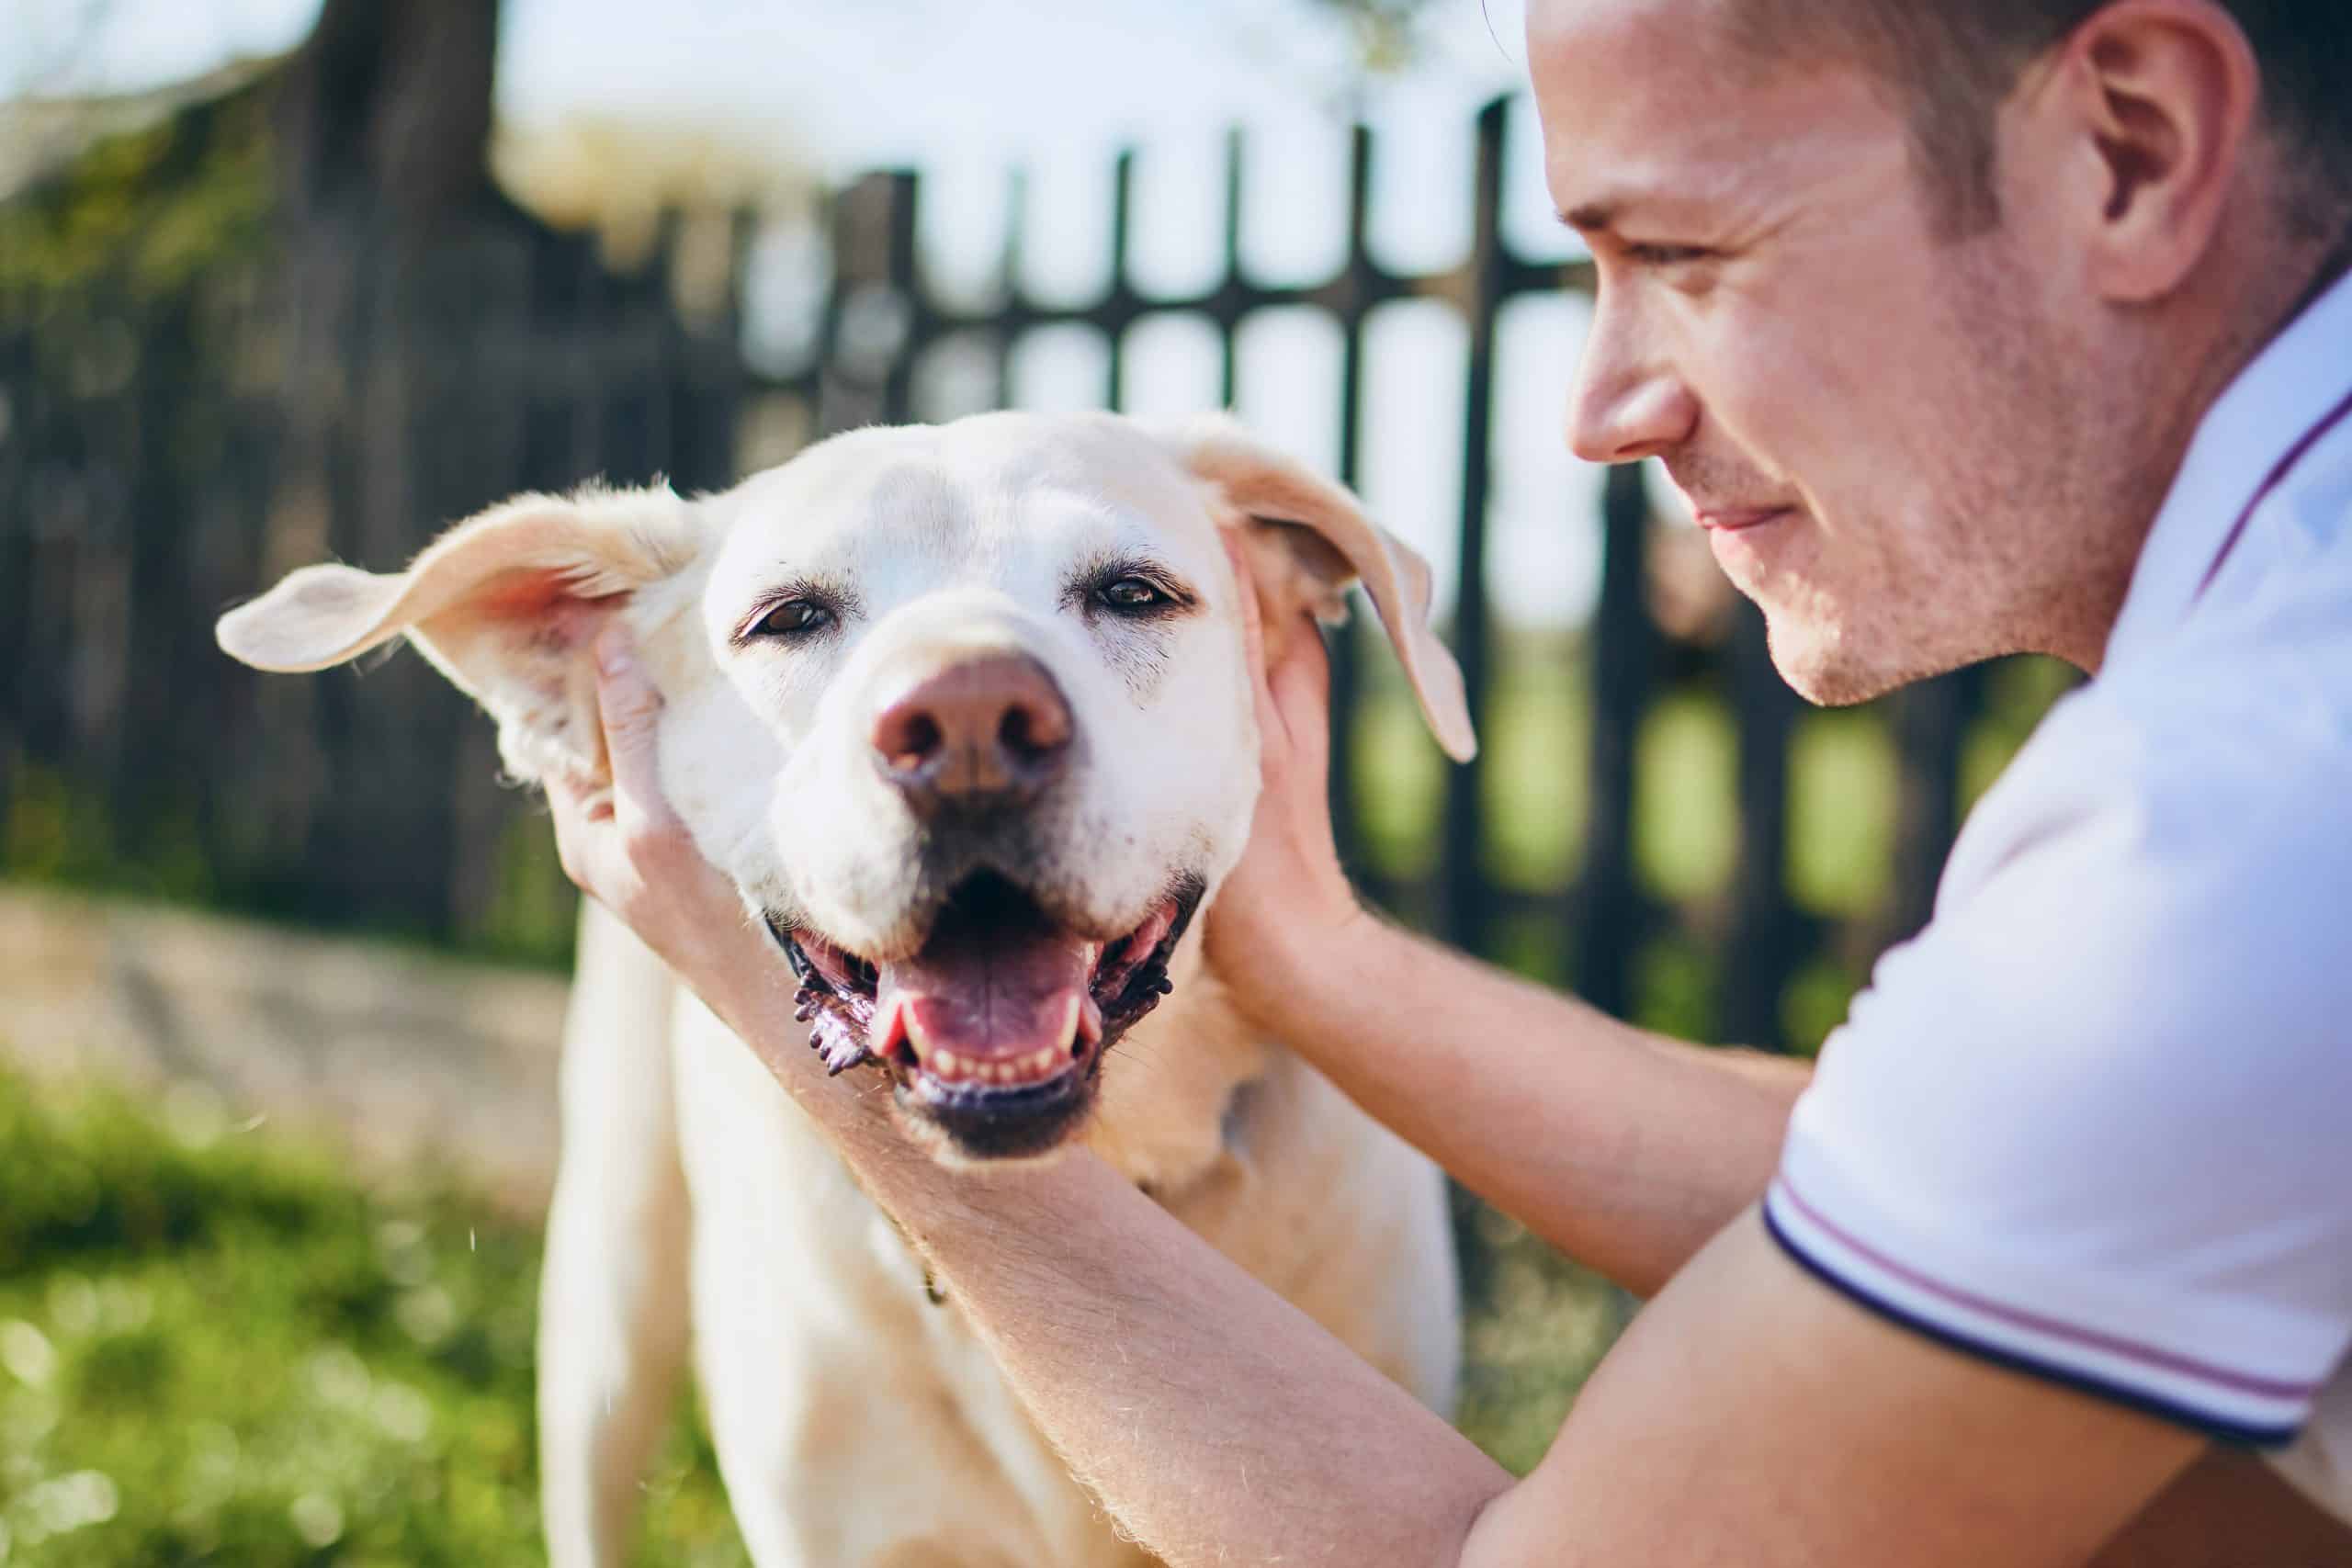 Fido Technologies, matches users with their perfect dog | <a href="https://www.shutterstock.com/image-photo/happy-dog-his-owner-young-man-1376948951" target="_blank" rel="noopener">Shutterstock.com</a>